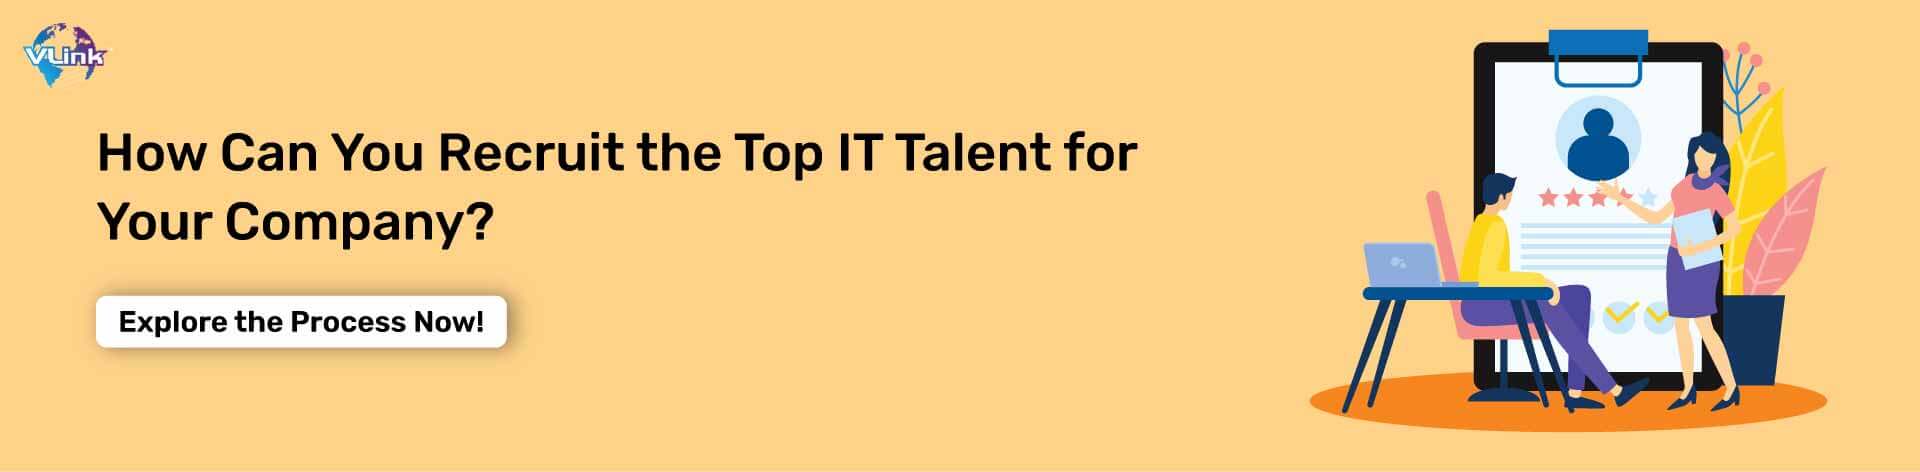 it-staffing-companies-and-recruitment-agencies-cta1